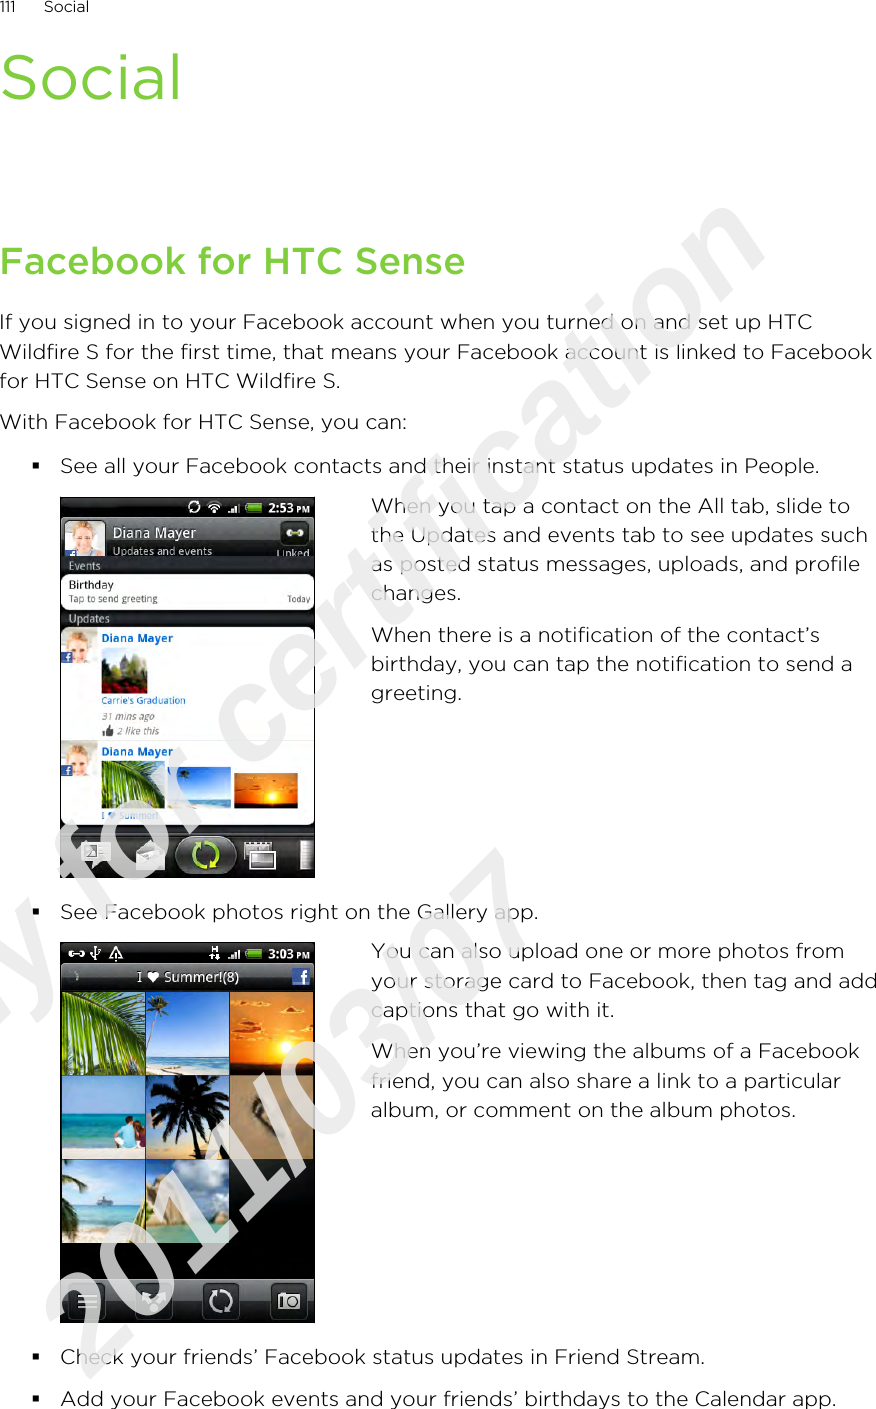 SocialFacebook for HTC SenseIf you signed in to your Facebook account when you turned on and set up HTCWildfire S for the first time, that means your Facebook account is linked to Facebookfor HTC Sense on HTC Wildfire S.With Facebook for HTC Sense, you can:§See all your Facebook contacts and their instant status updates in People.When you tap a contact on the All tab, slide tothe Updates and events tab to see updates suchas posted status messages, uploads, and profilechanges.When there is a notification of the contact’sbirthday, you can tap the notification to send agreeting.§See Facebook photos right on the Gallery app.You can also upload one or more photos fromyour storage card to Facebook, then tag and addcaptions that go with it.When you’re viewing the albums of a Facebookfriend, you can also share a link to a particularalbum, or comment on the album photos.§Check your friends’ Facebook status updates in Friend Stream.§Add your Facebook events and your friends’ birthdays to the Calendar app.111 SocialOnly for certification  2011/03/07